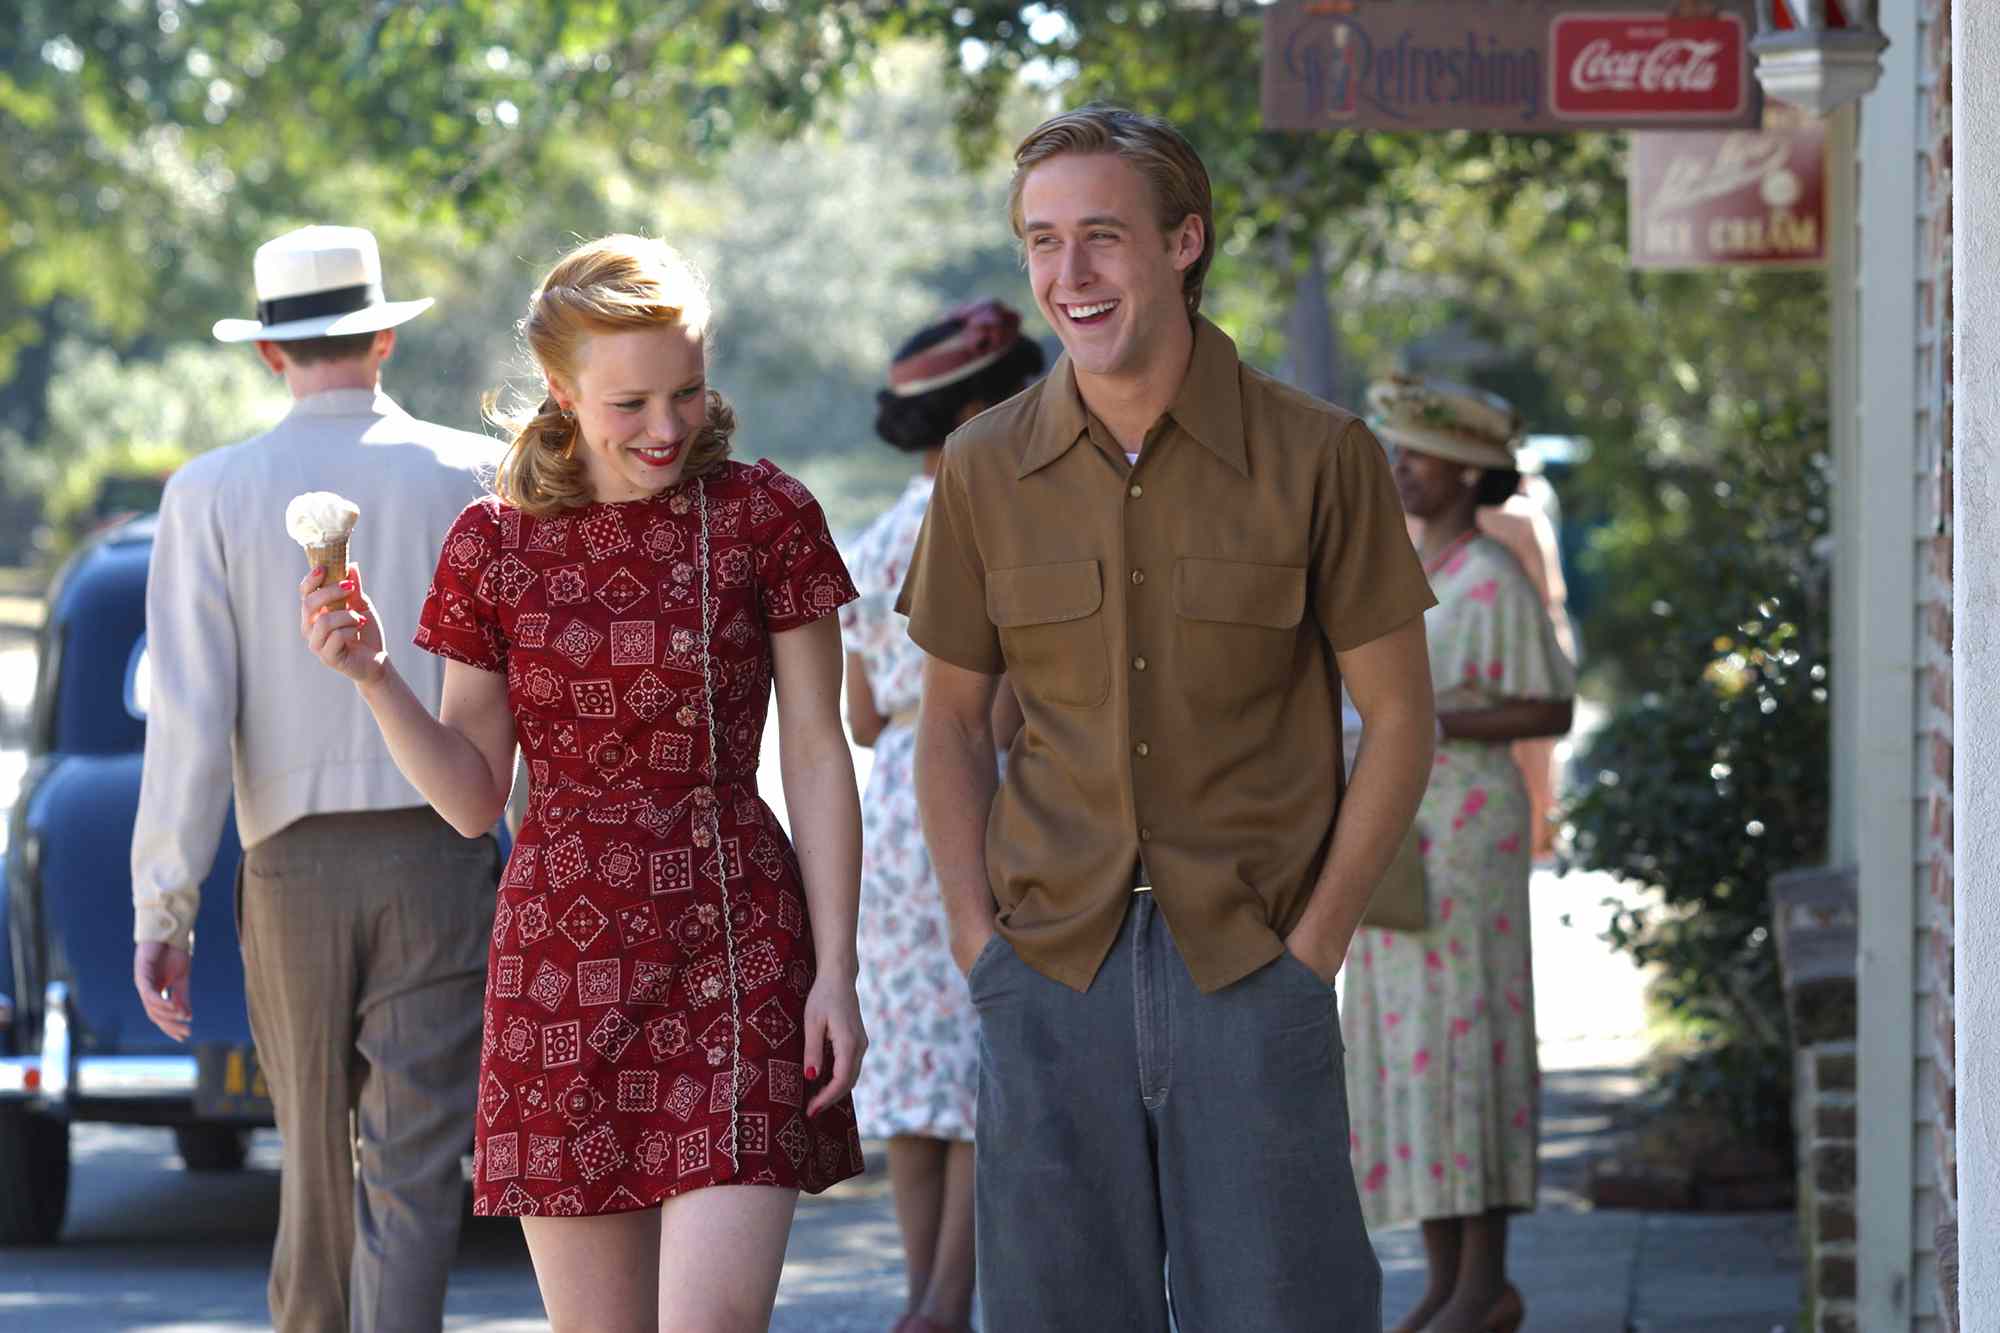 13 Movies Like “The Notebook” to Watch Now